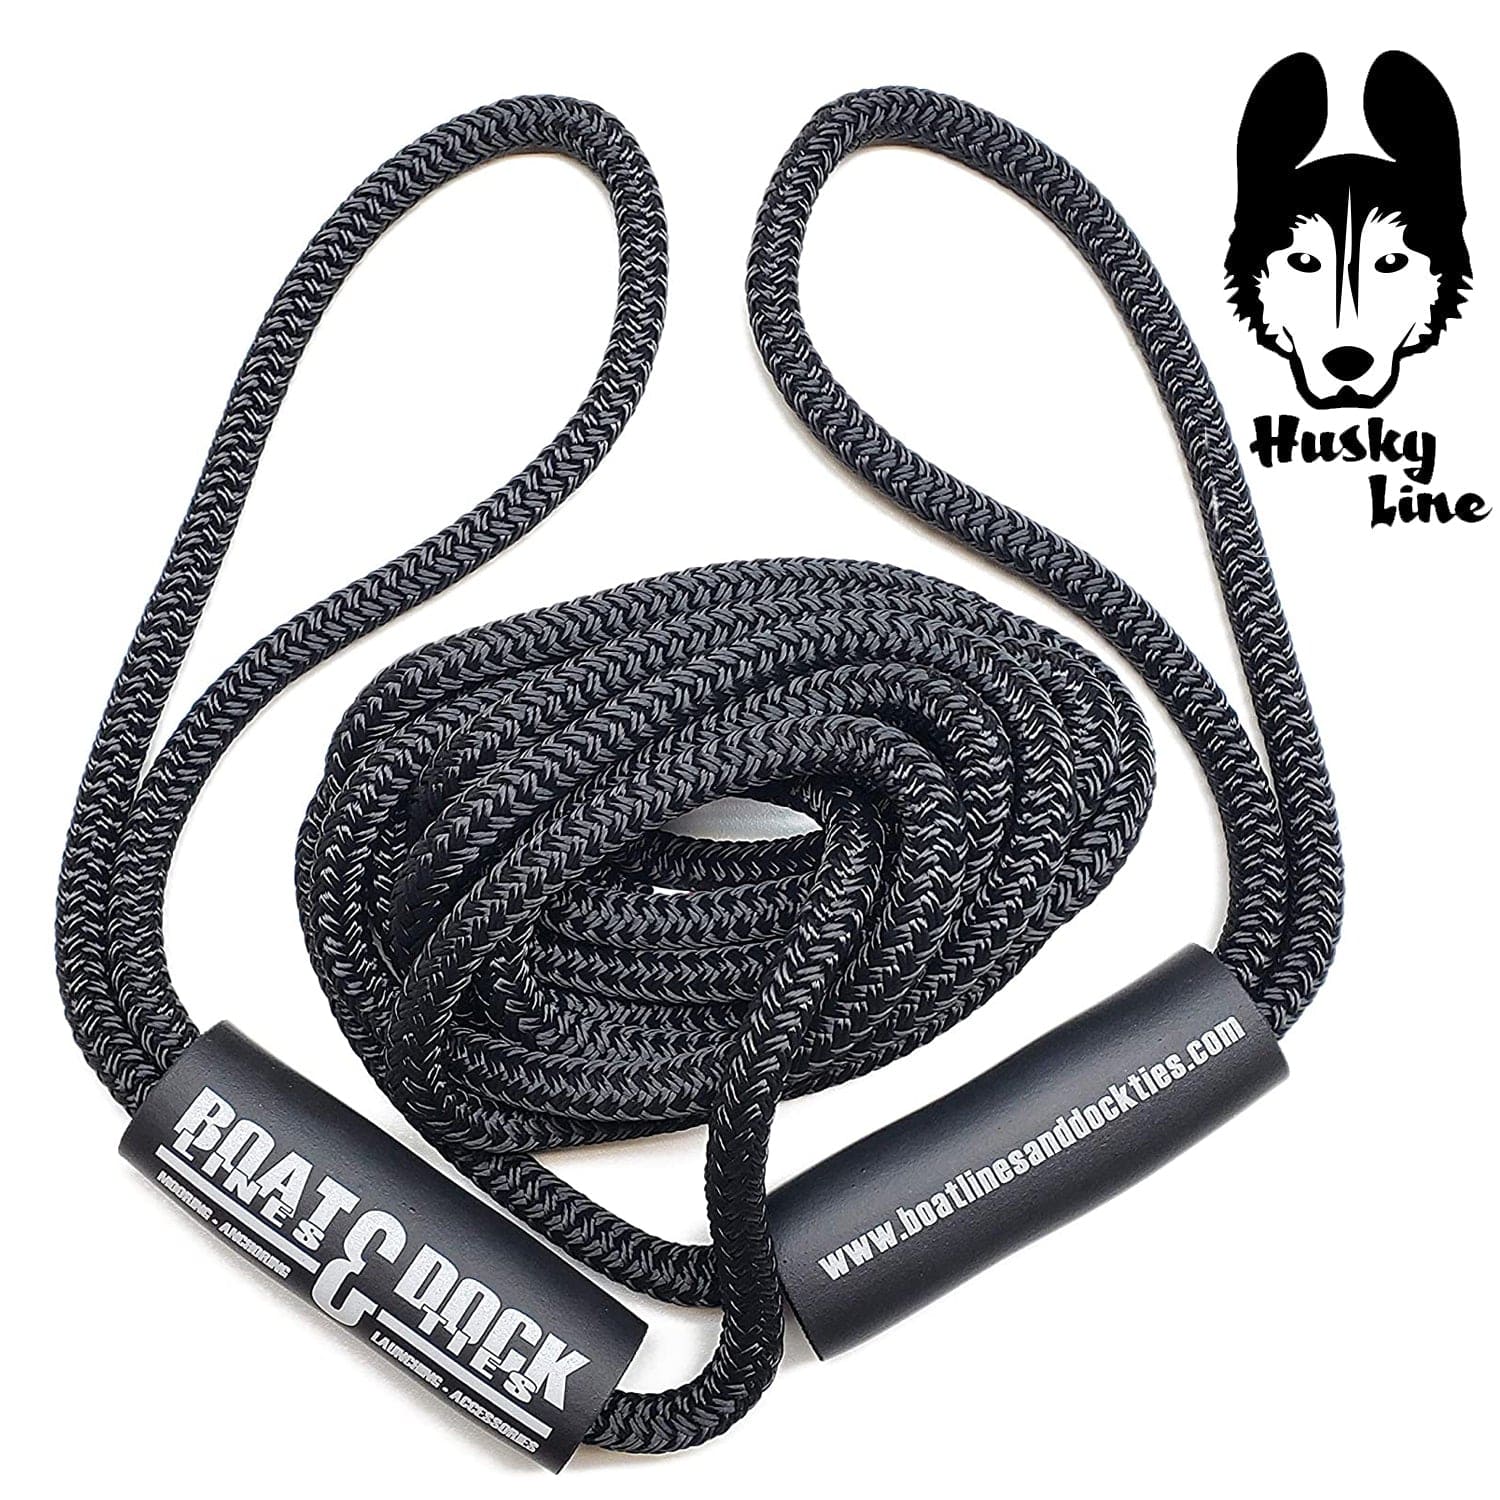 Boat Throw Rope- Husky Line 2 Loop Double Braided Nylon Rope, Stitched  Loops and Floats